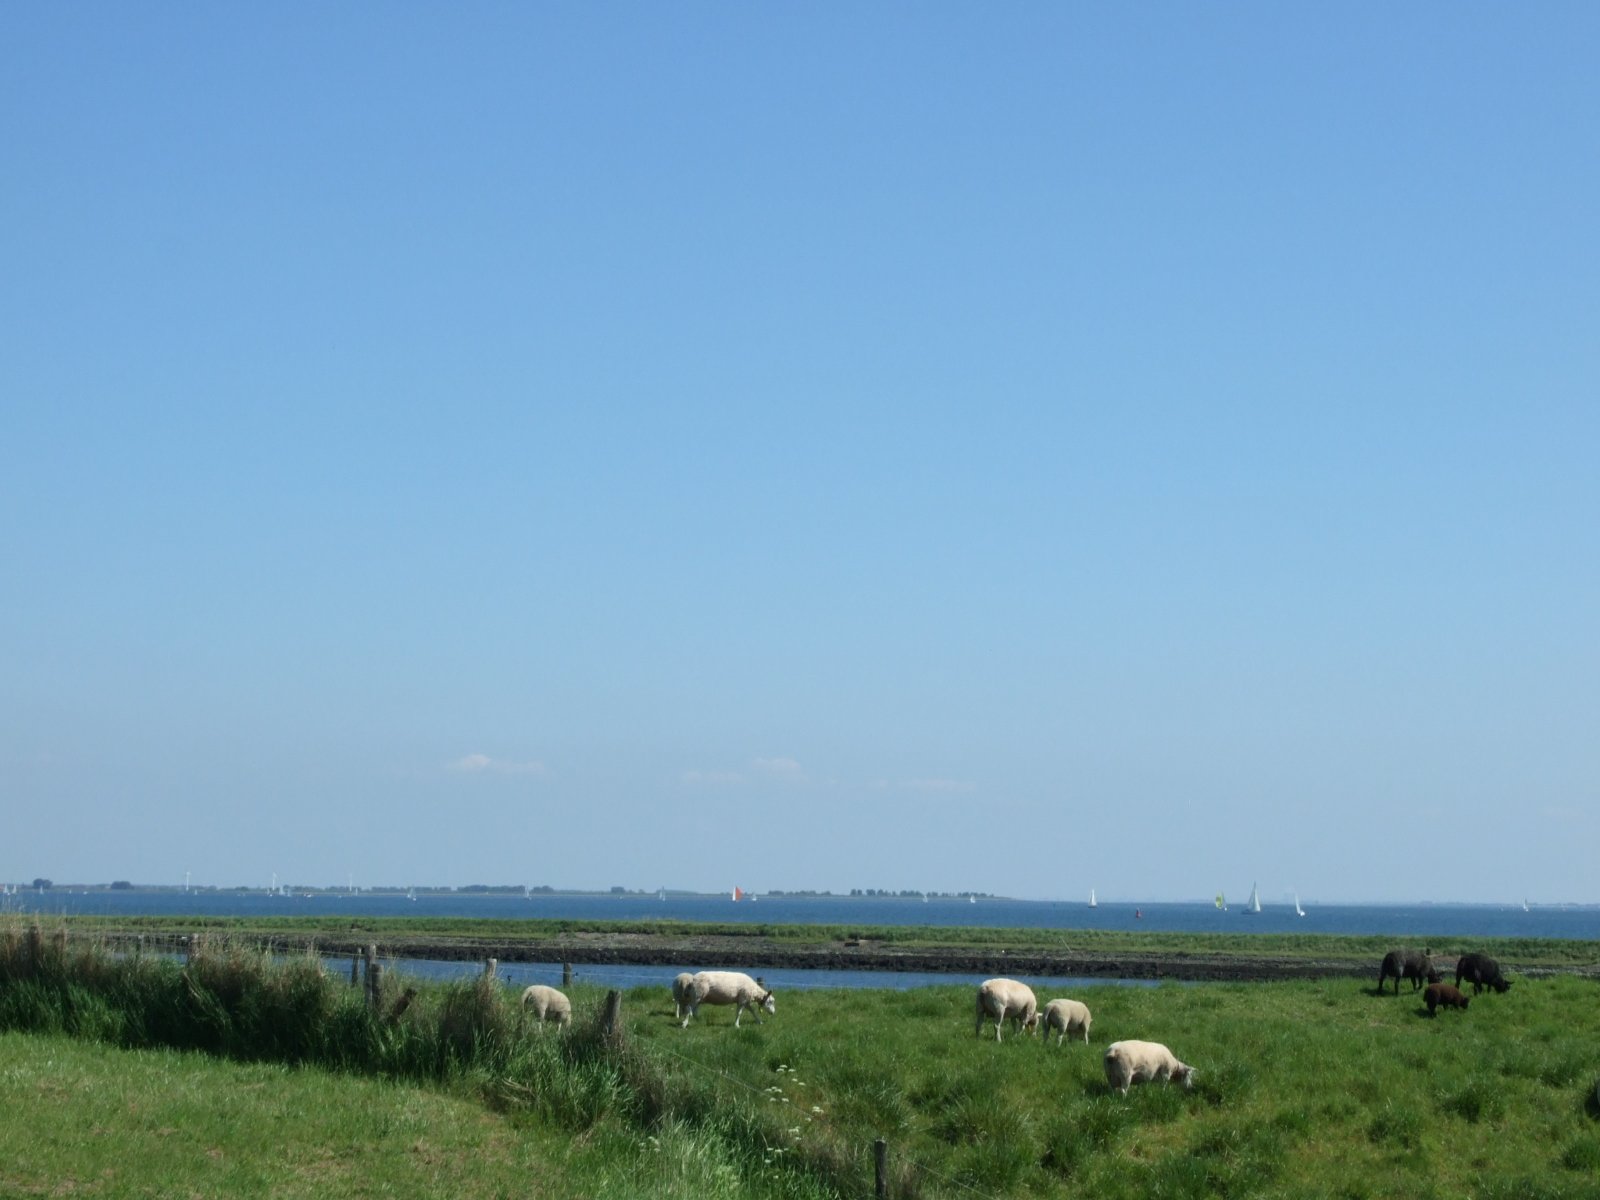 several sheep grazing on grass in a field near water